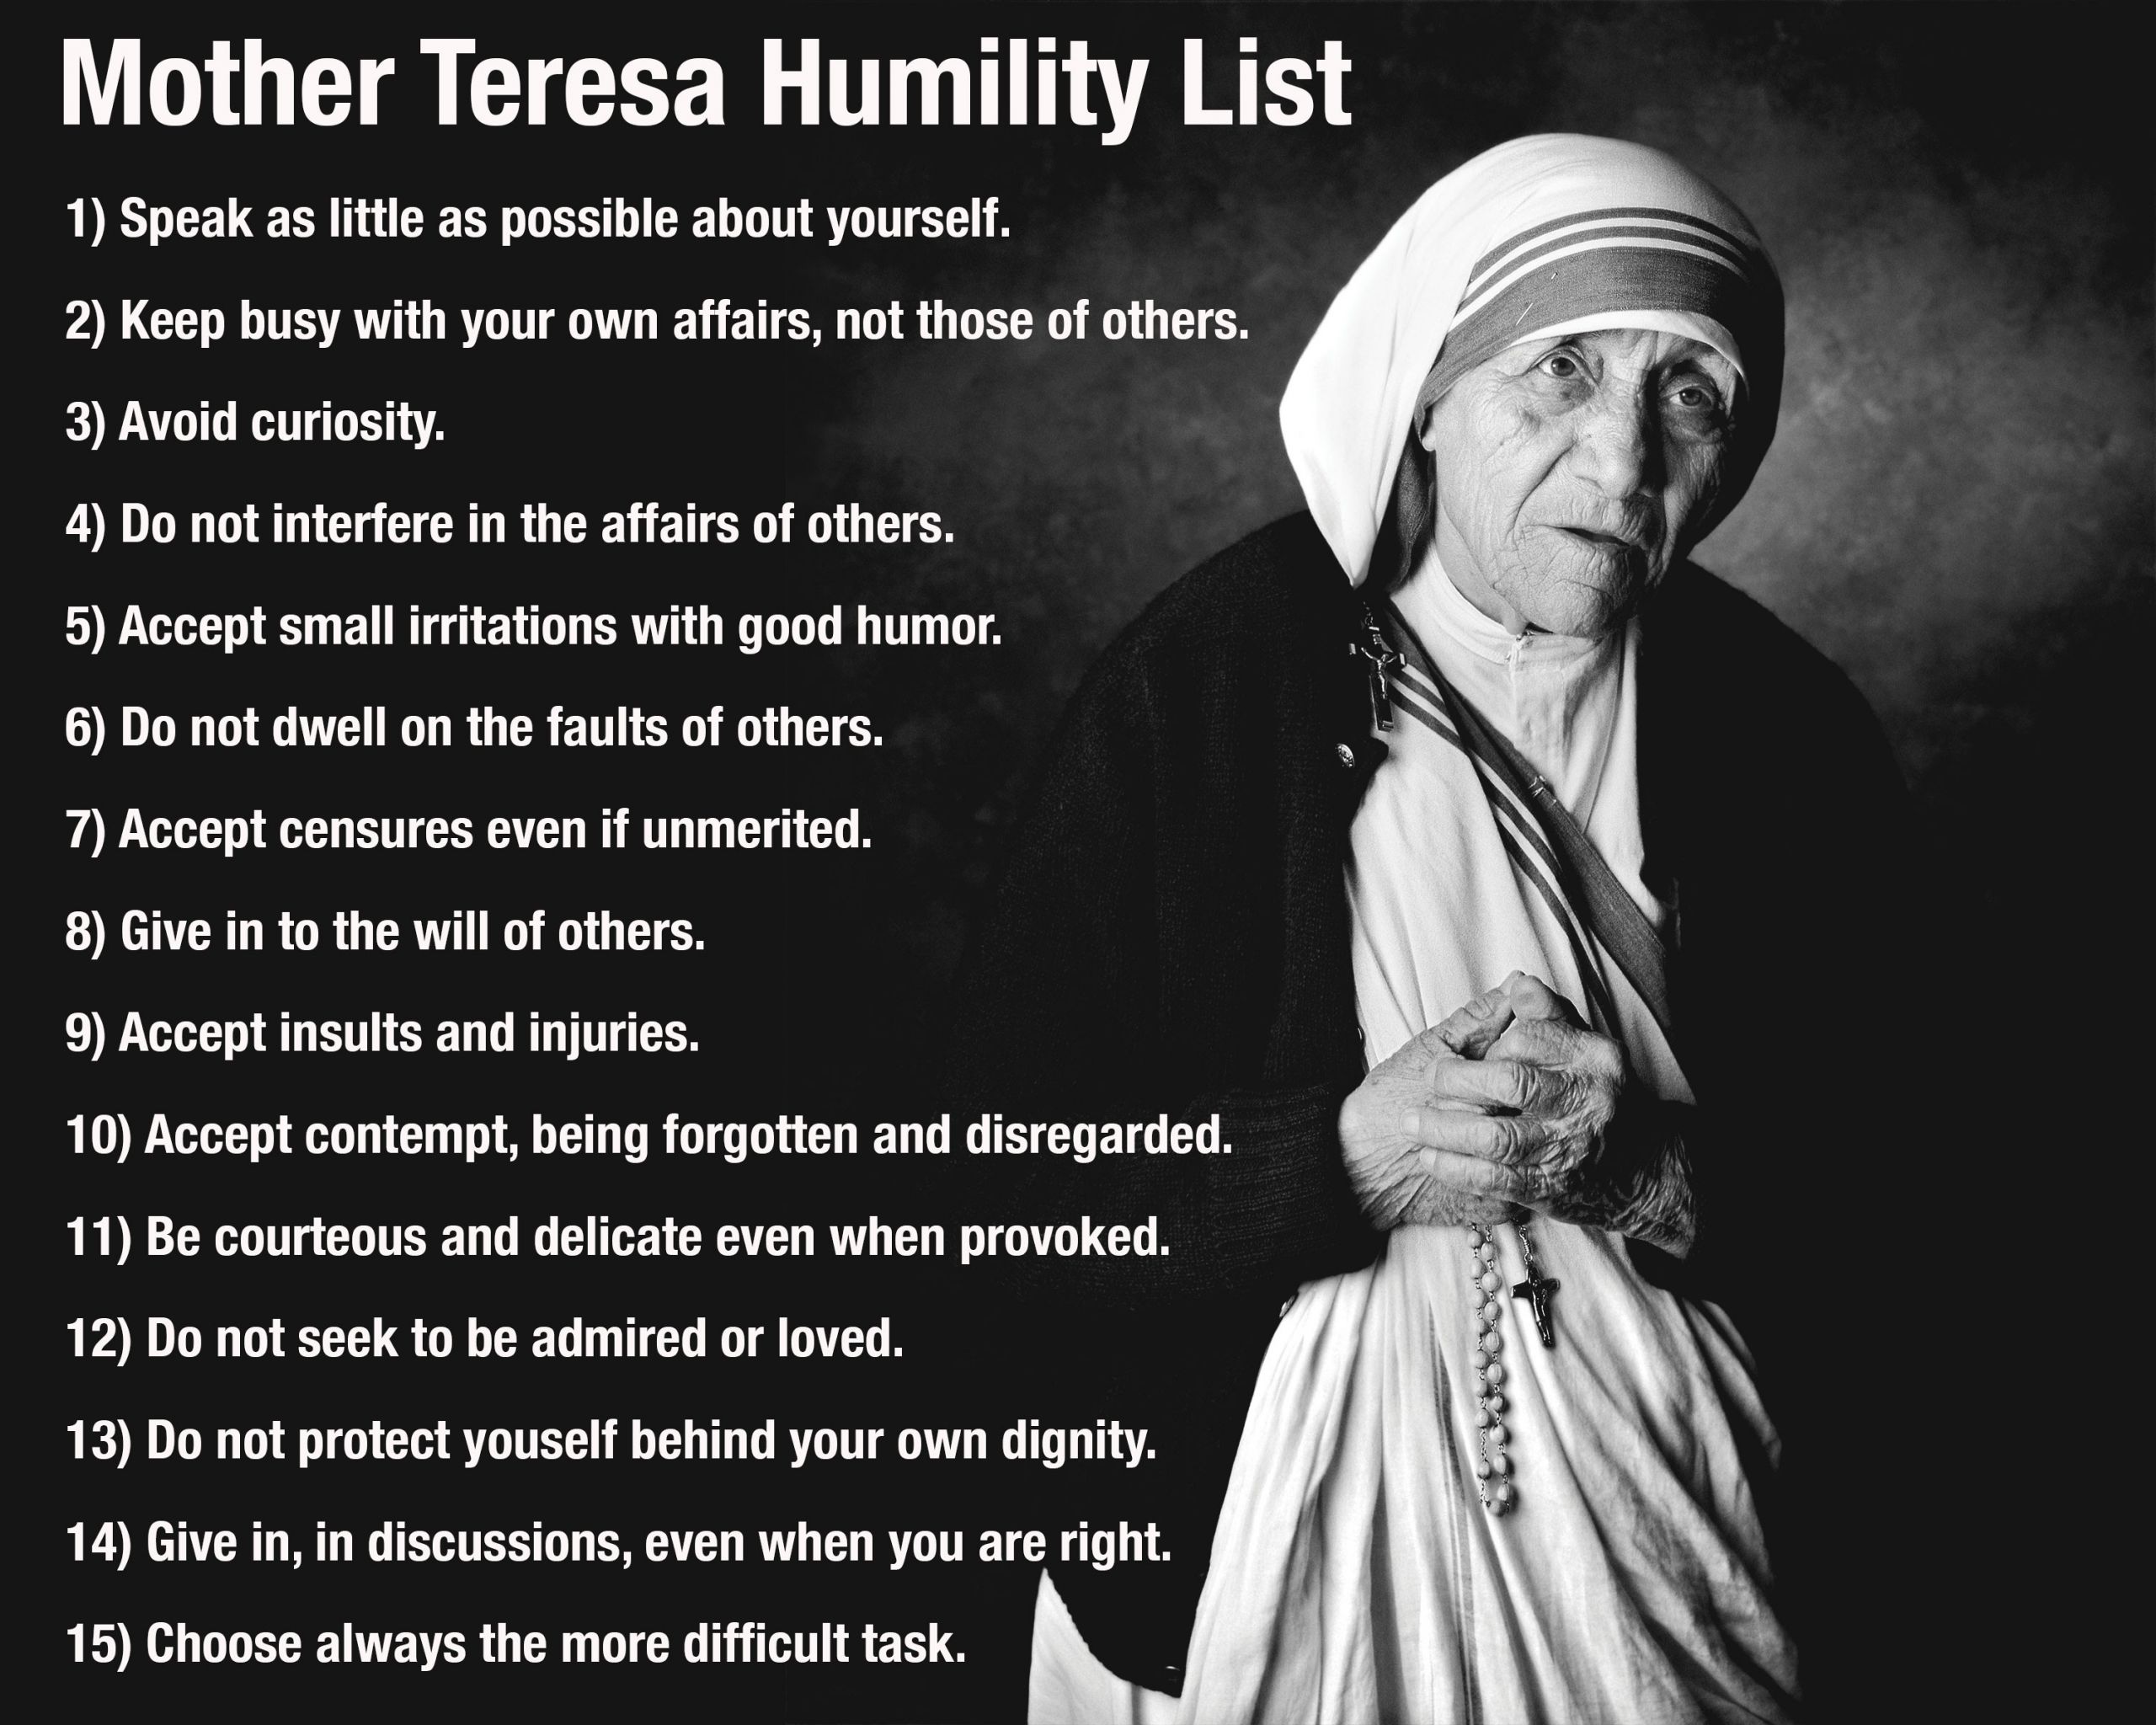 Quote From Mother Teresa
 Mother Teresa’s Humility List